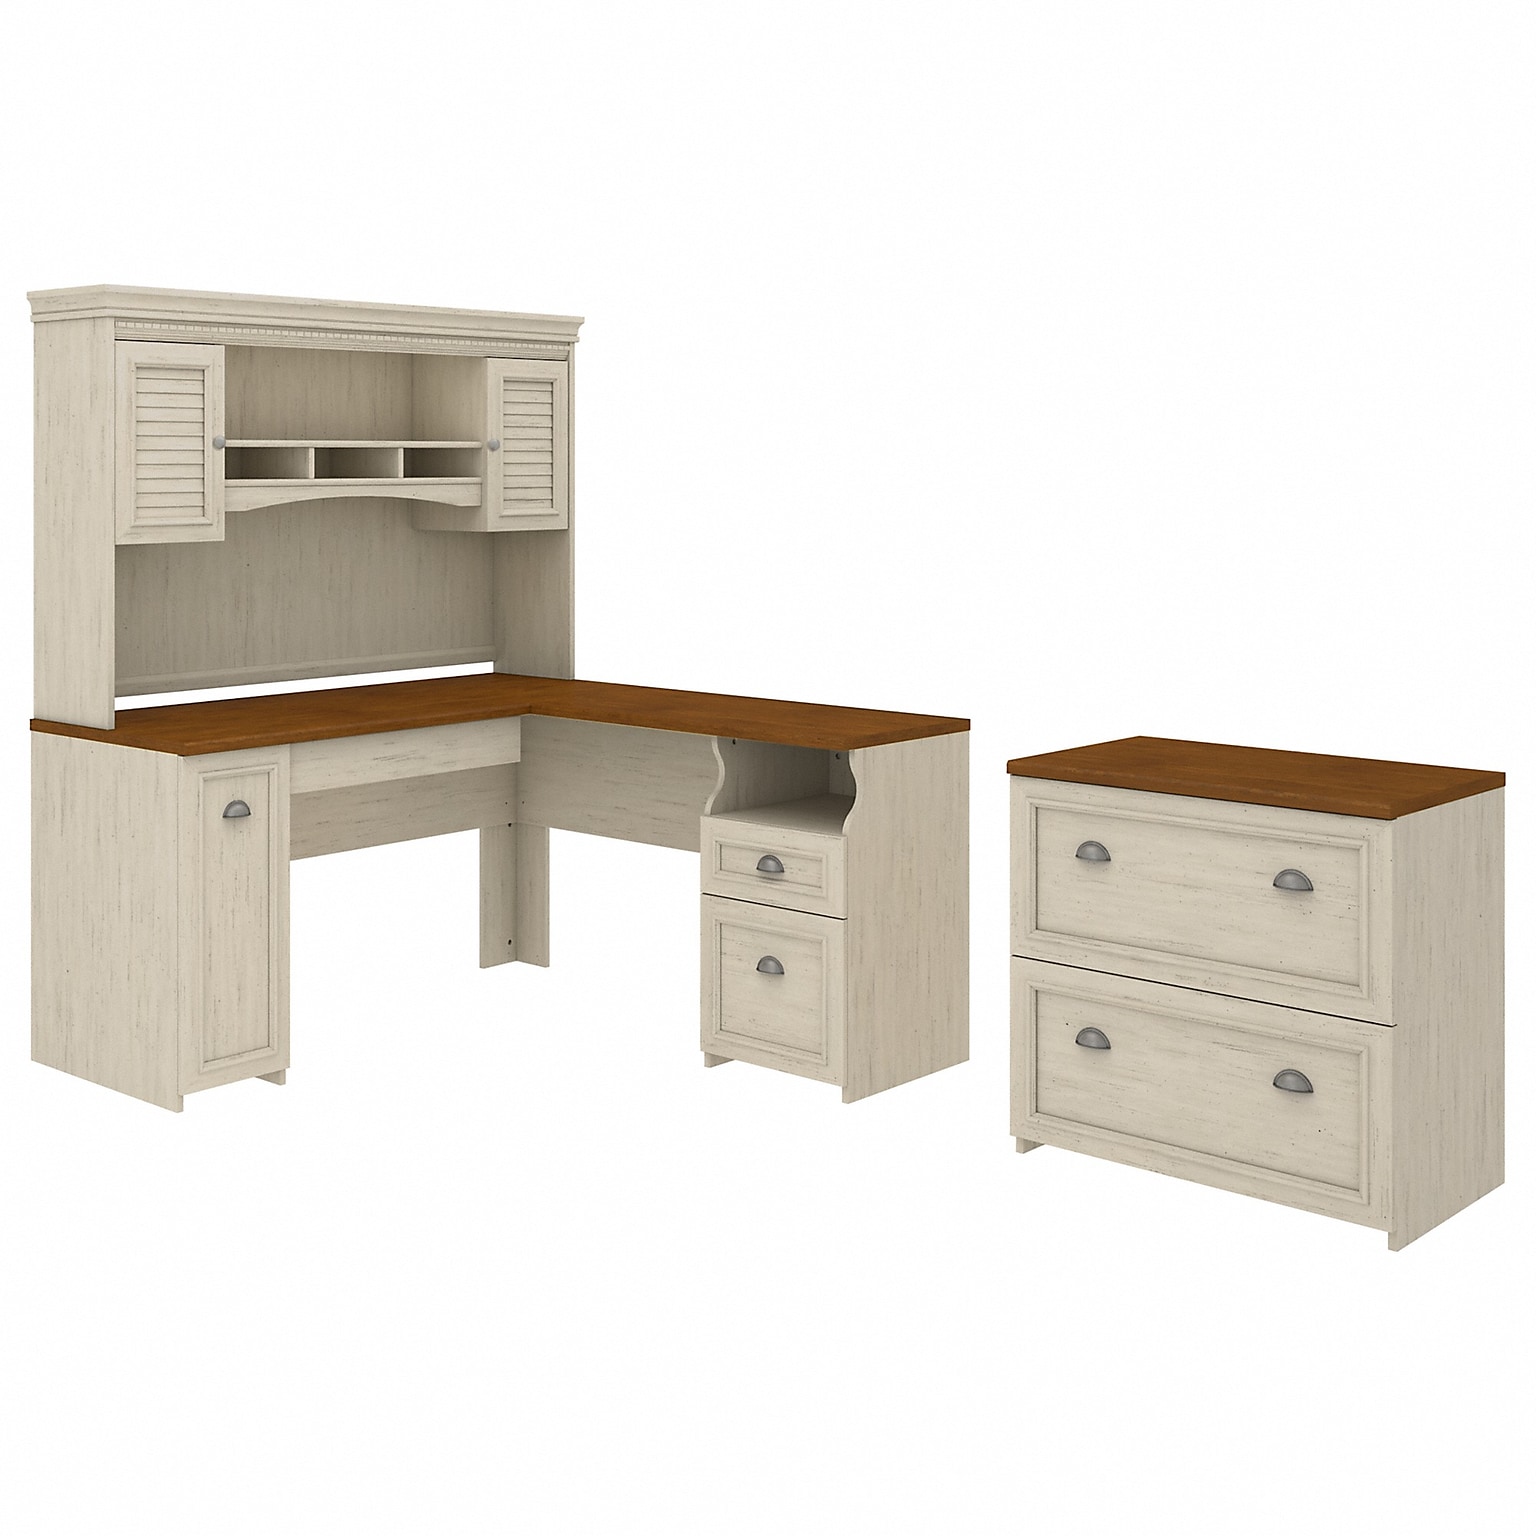 Bush Furniture Fairview 60W L Shaped Desk with Hutch and Lateral File Cabinet, Antique White/Tea Maple (FV003AW)